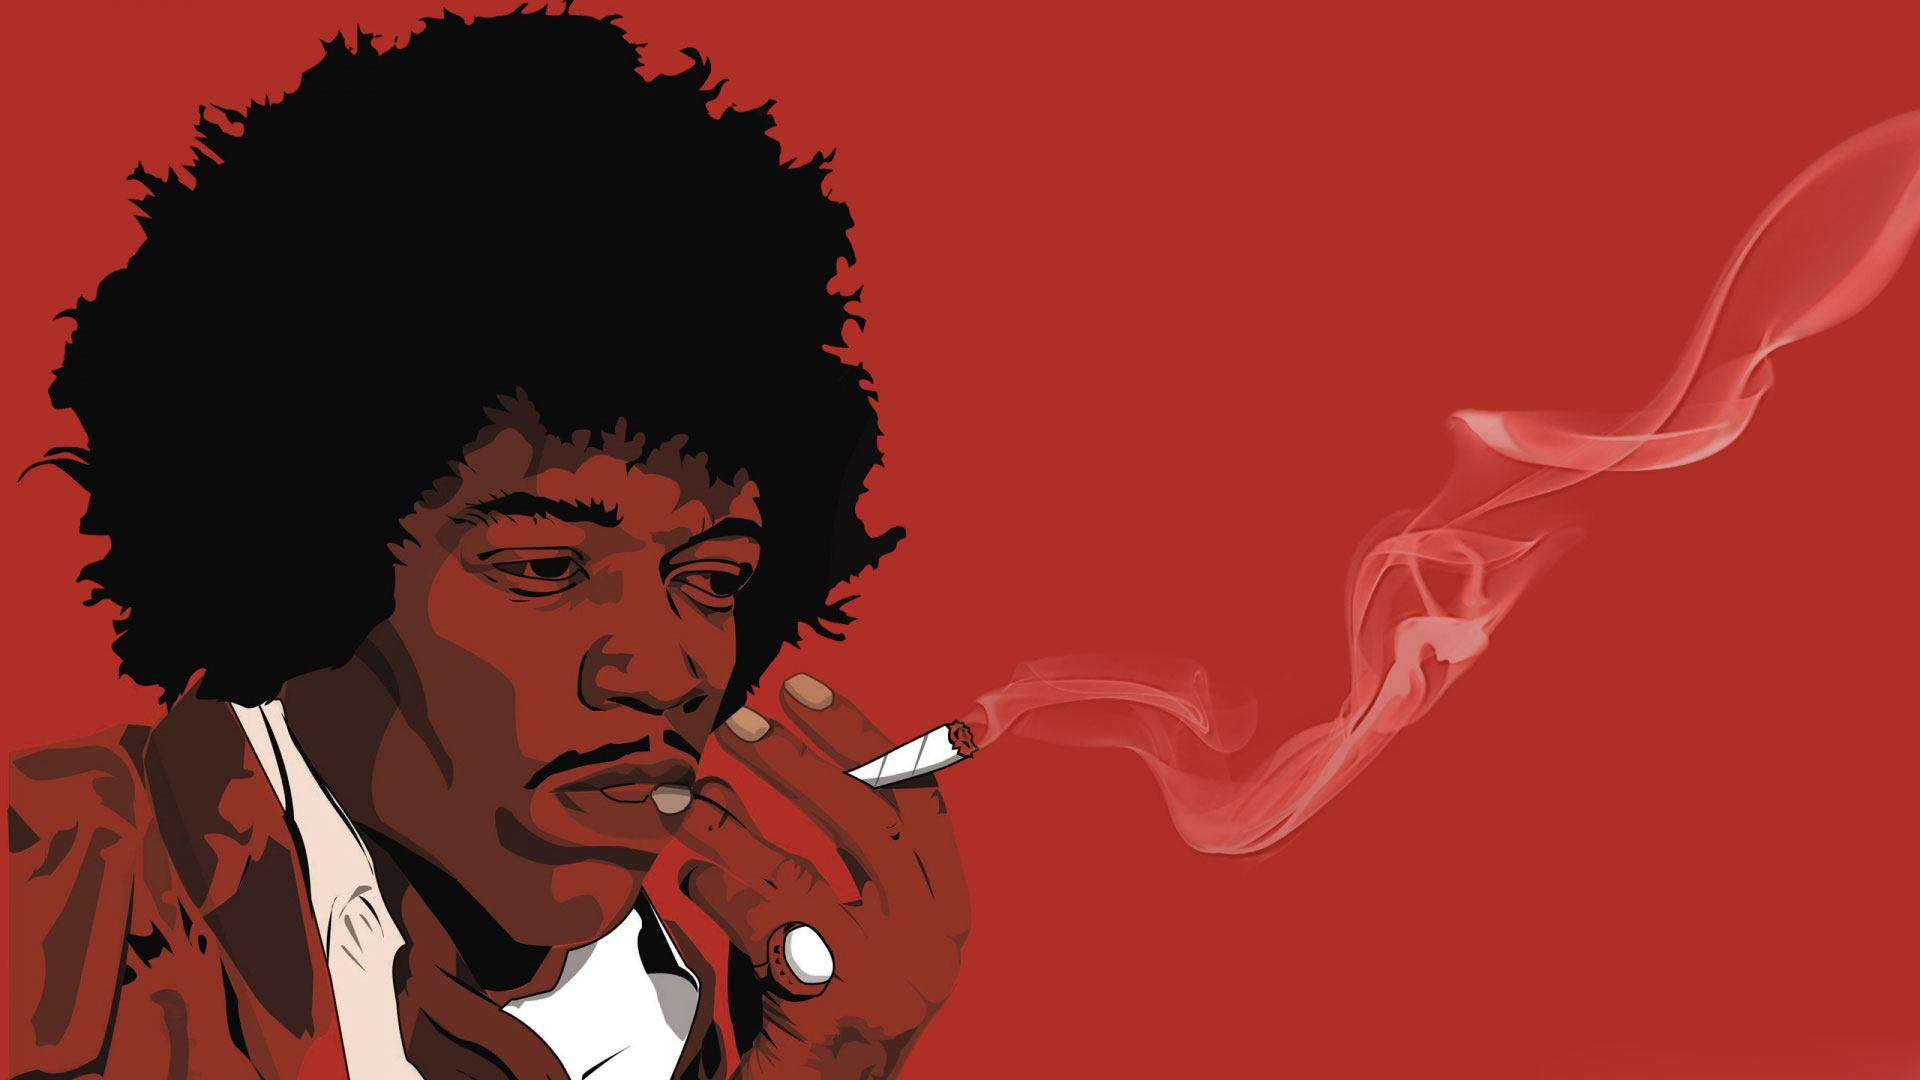 Jimi Hendrix red background | Music pictures | Rock wallpaper ...